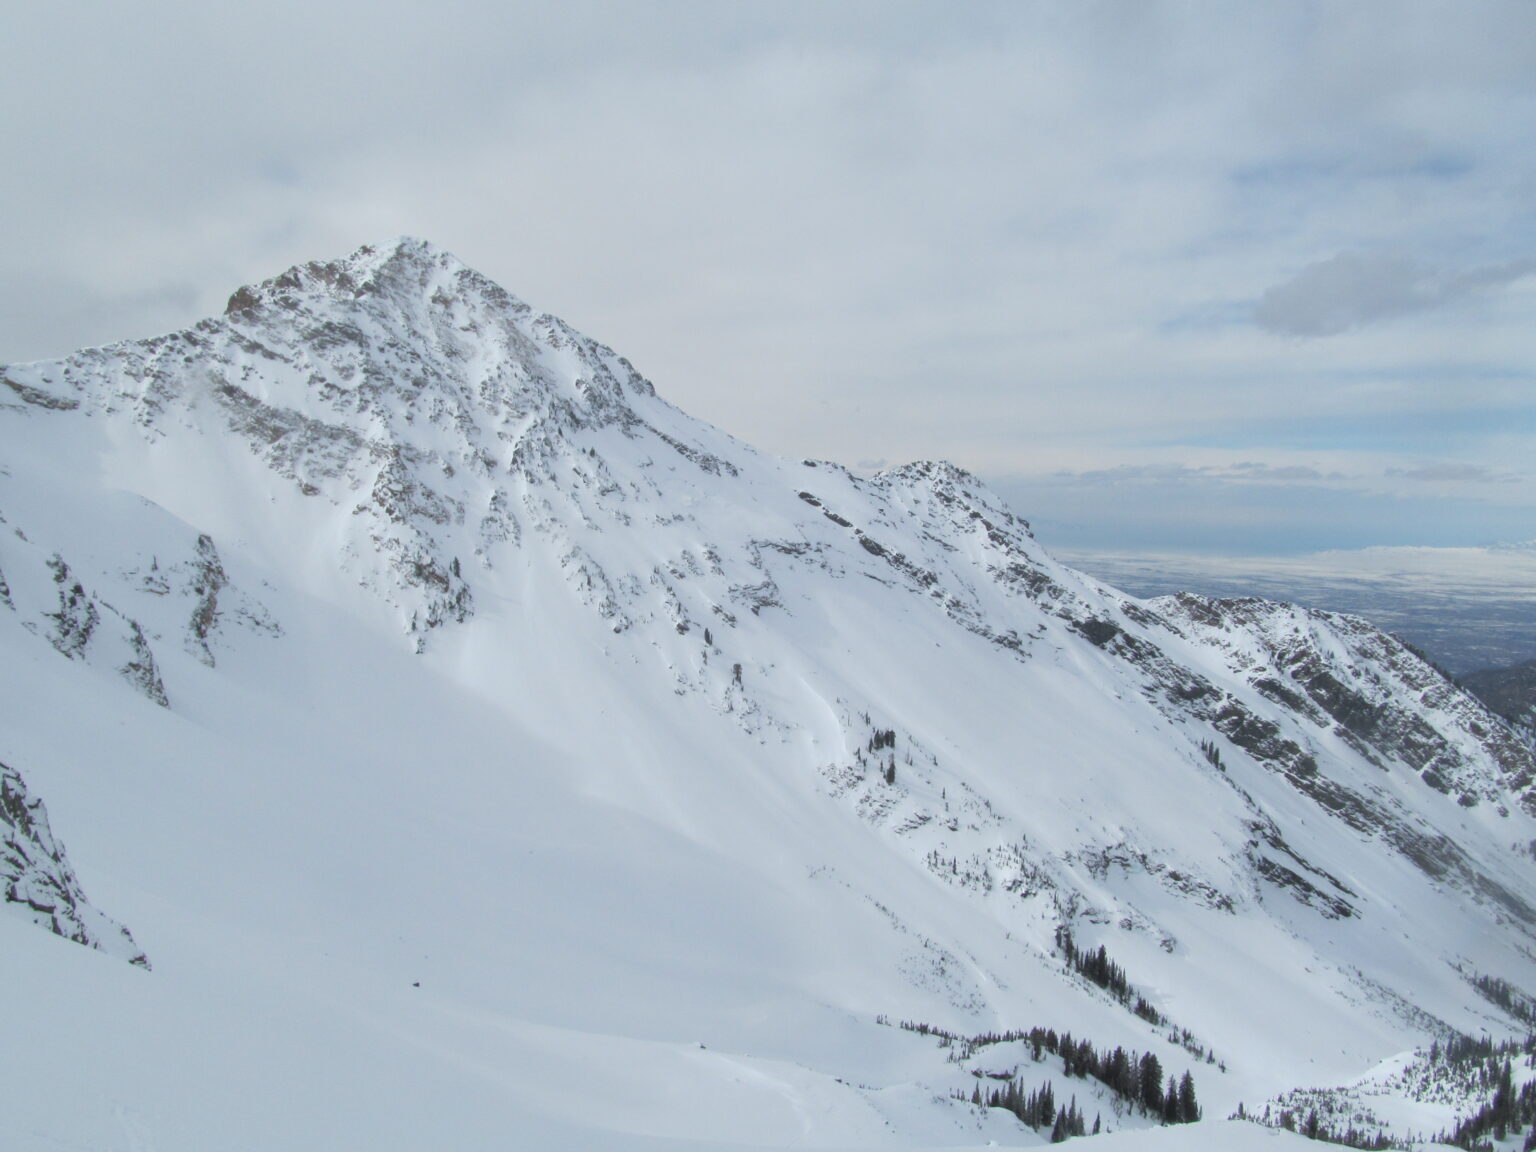 Looking at the East face of East Twin Peak in the Wasatch Backcountry